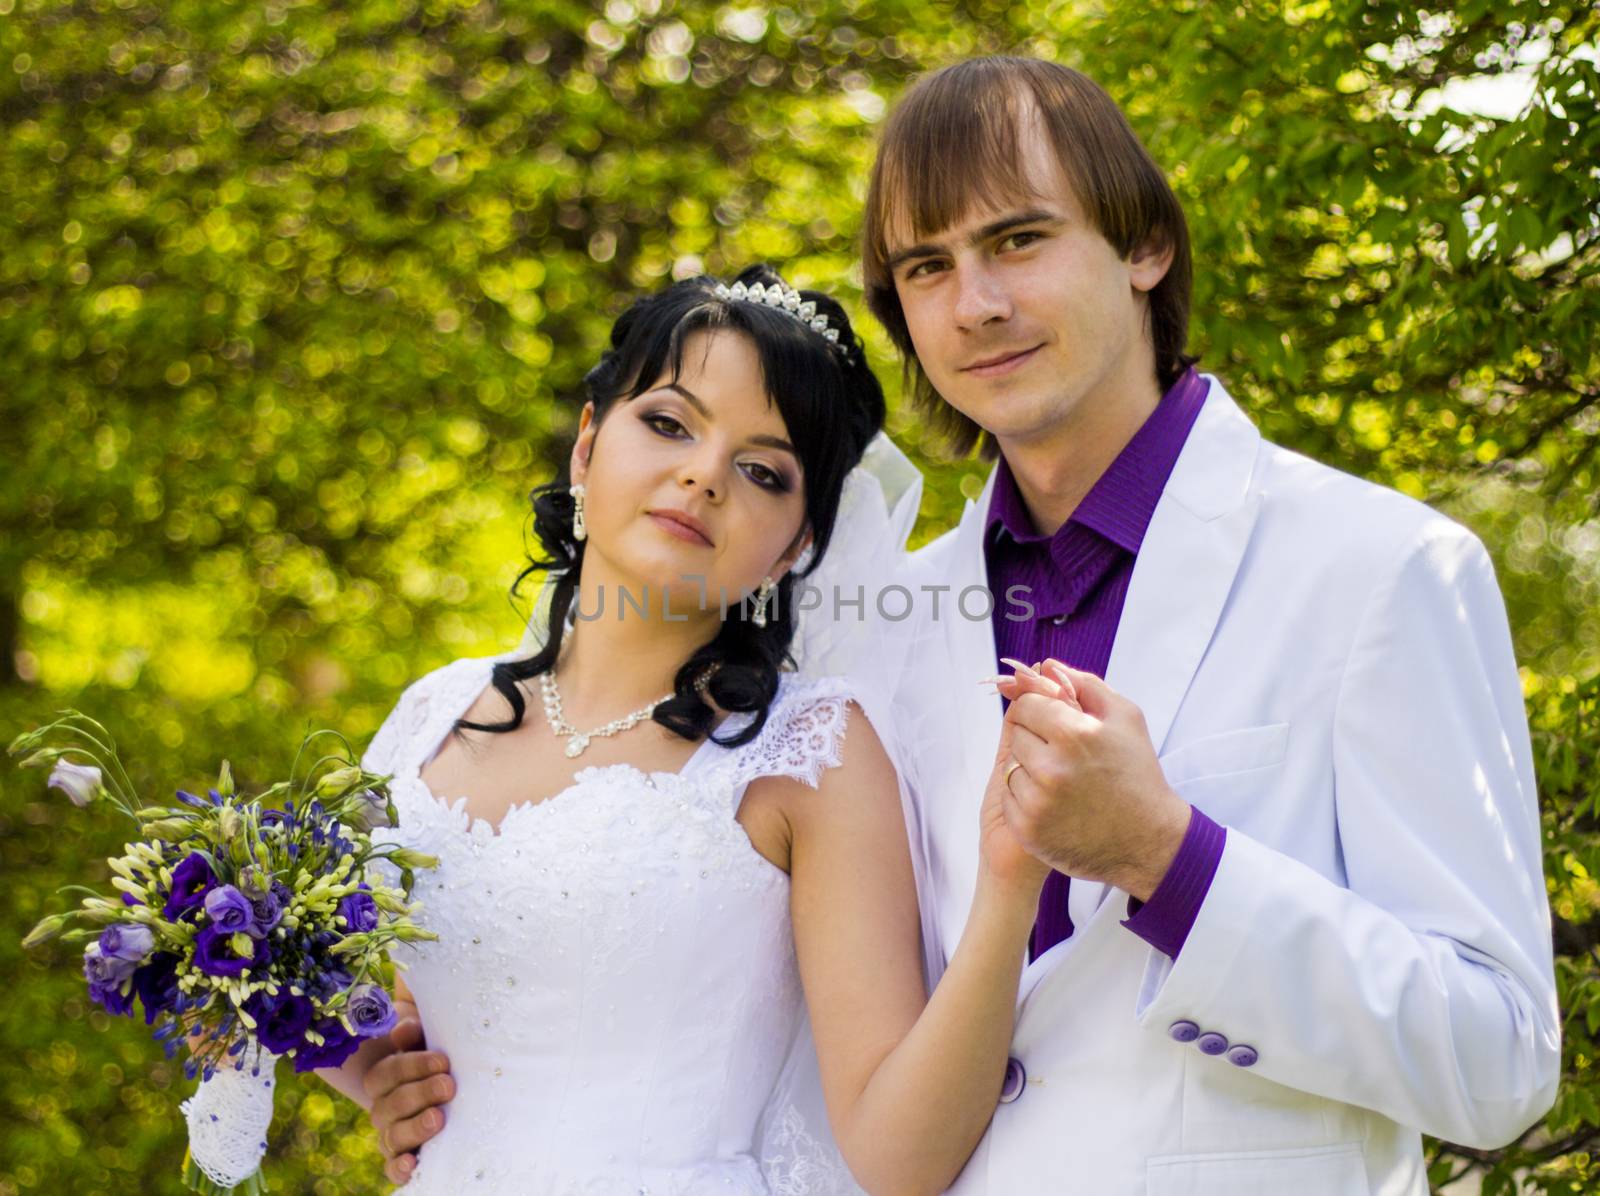 Happy bride and groom on their wedding. For your commercial and editorial use.